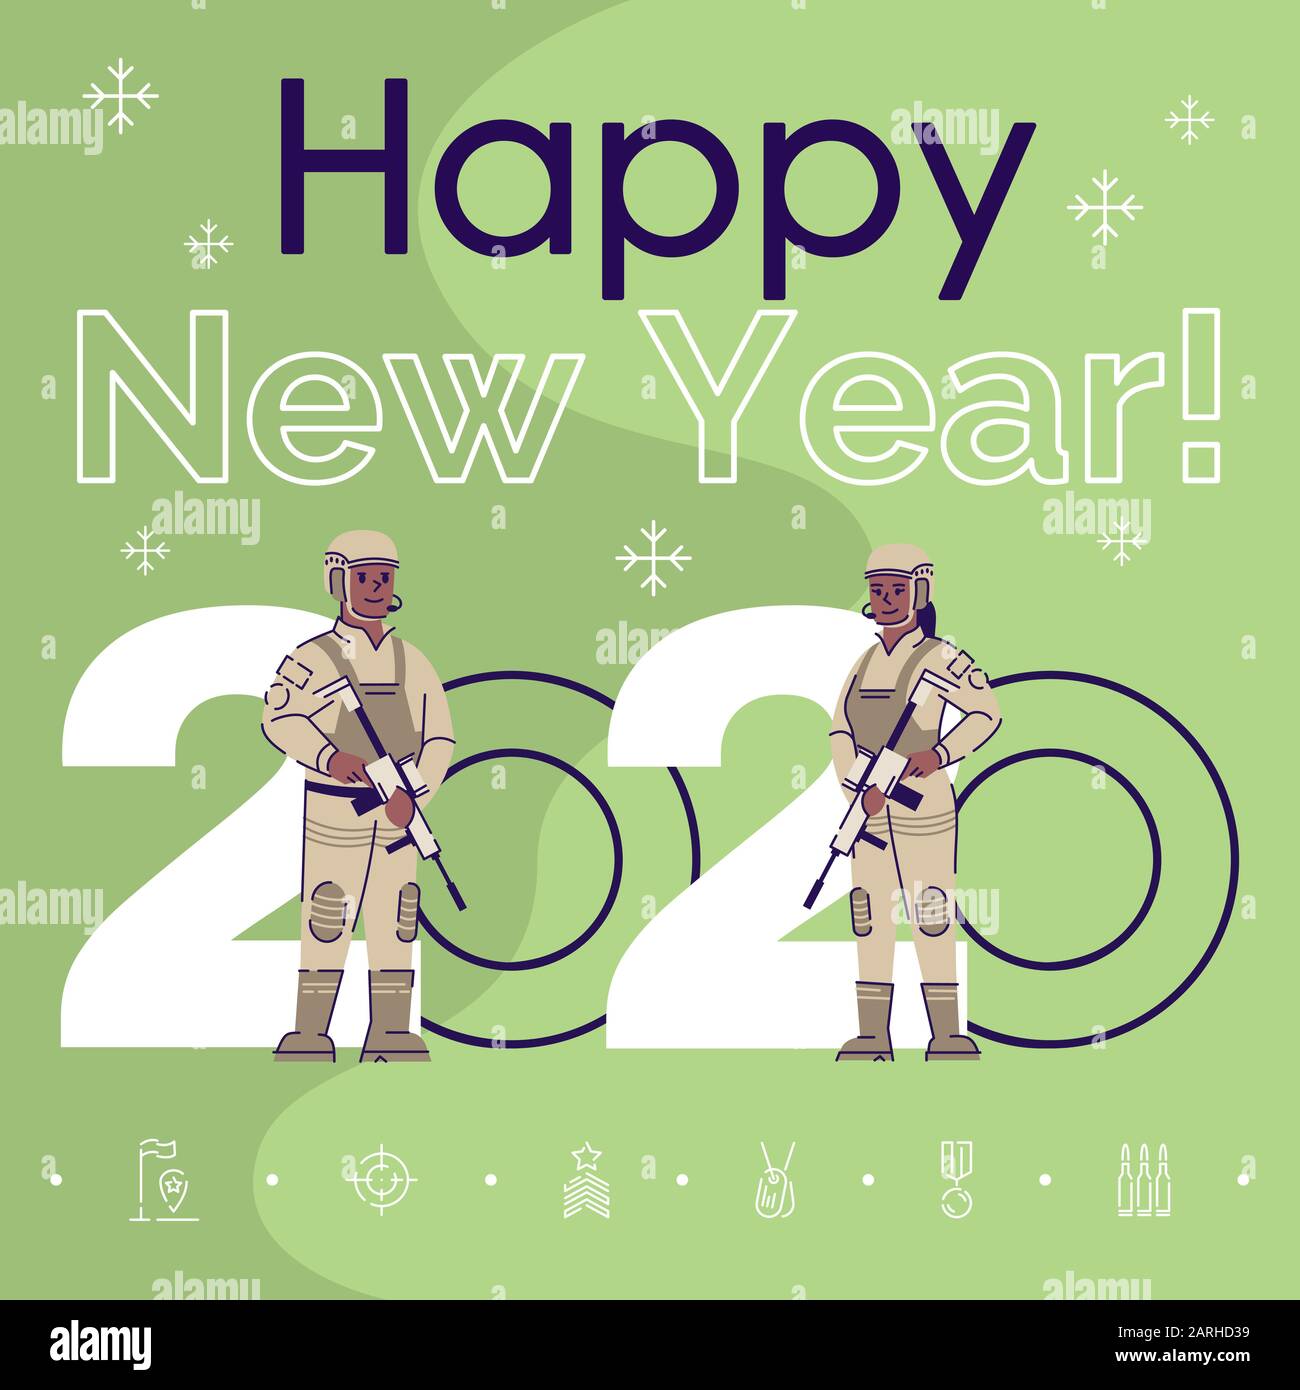 Profession social media post mockup. Happy new year 2020 phrase. Web banner design template. Soldiers with weapon booster, content layout with inscrip Stock Vector